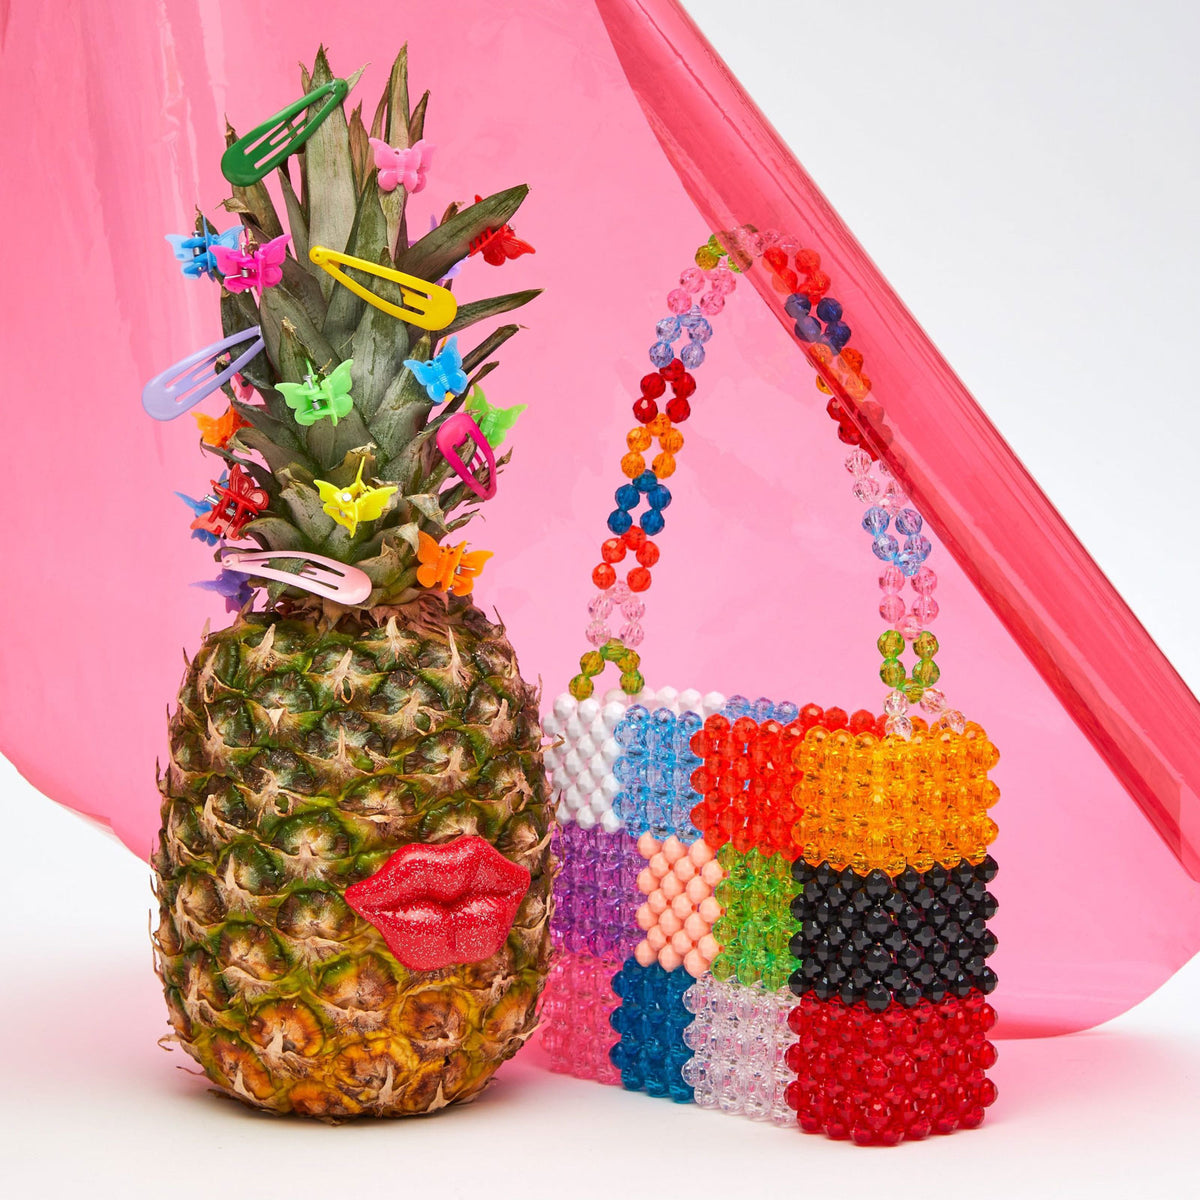 The Mini Ash Bag next to a decorated pineapple.